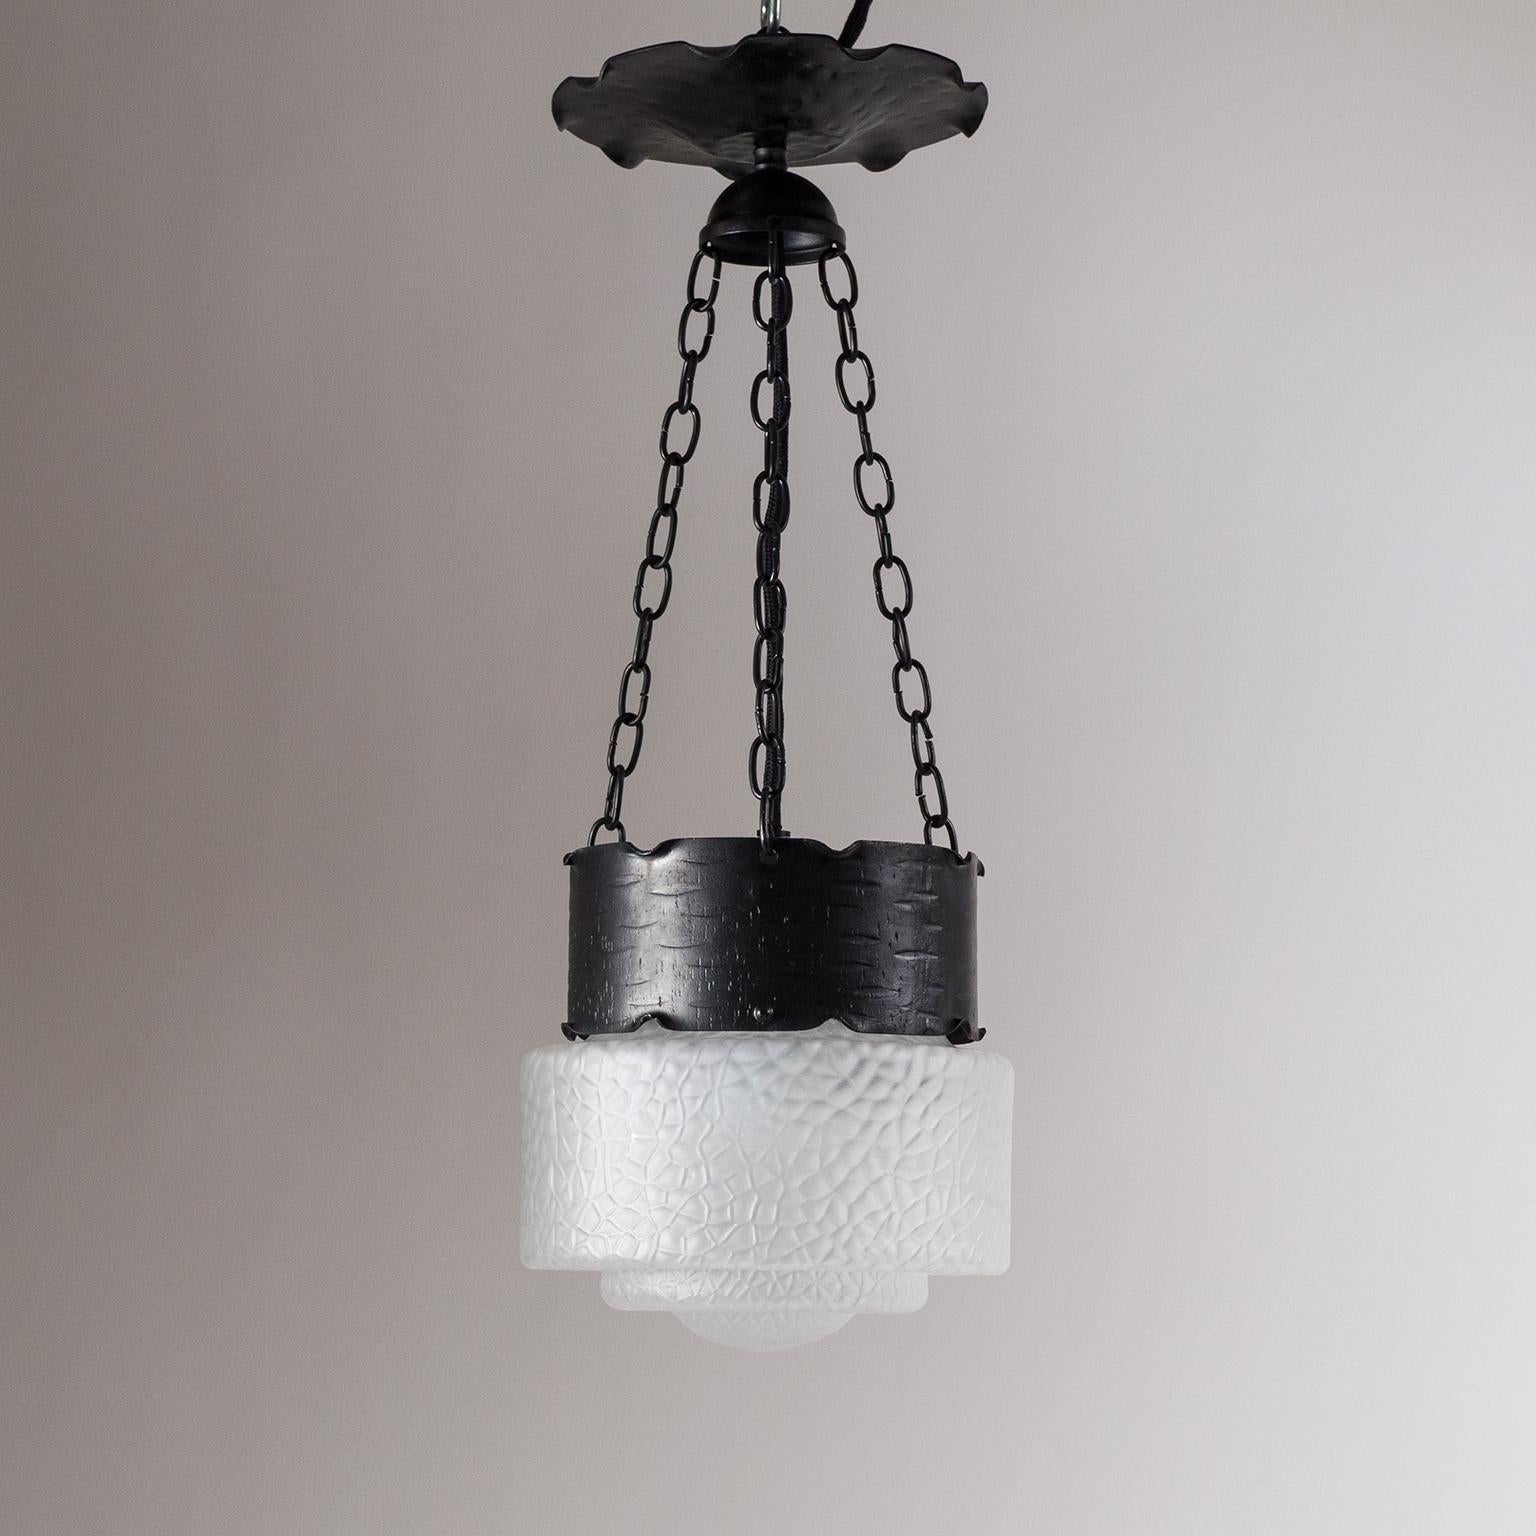 Art Deco pendant from Austria, circa 1930. Forged and hammered steel or iron hardware with a stunning textured satin glass diffuser. The tiered glass has an intricate abstract texture that is often referred to as 